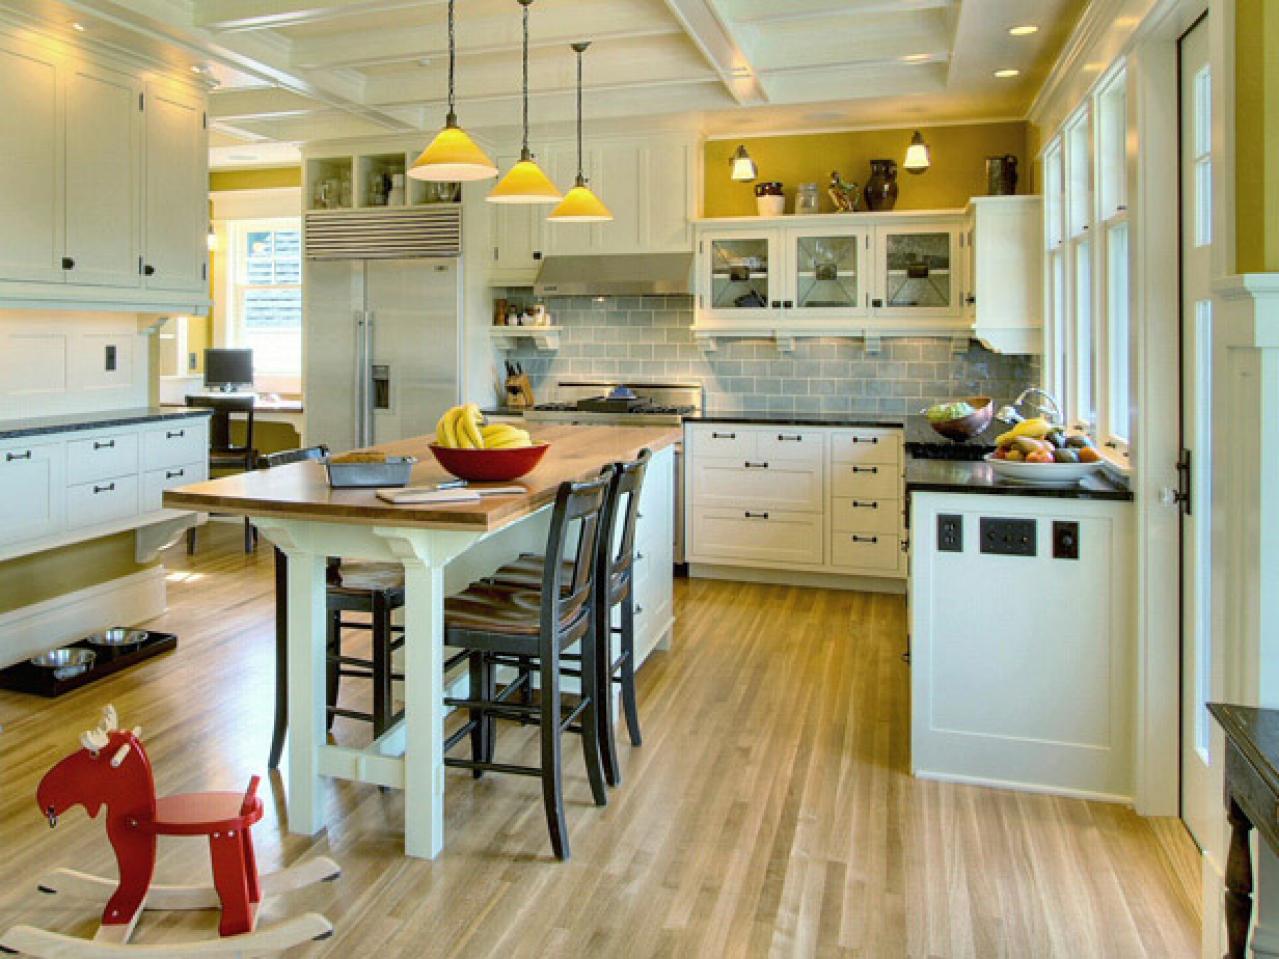 Kitchen Island Options: Pictures & Ideas From HGTV | HGTV